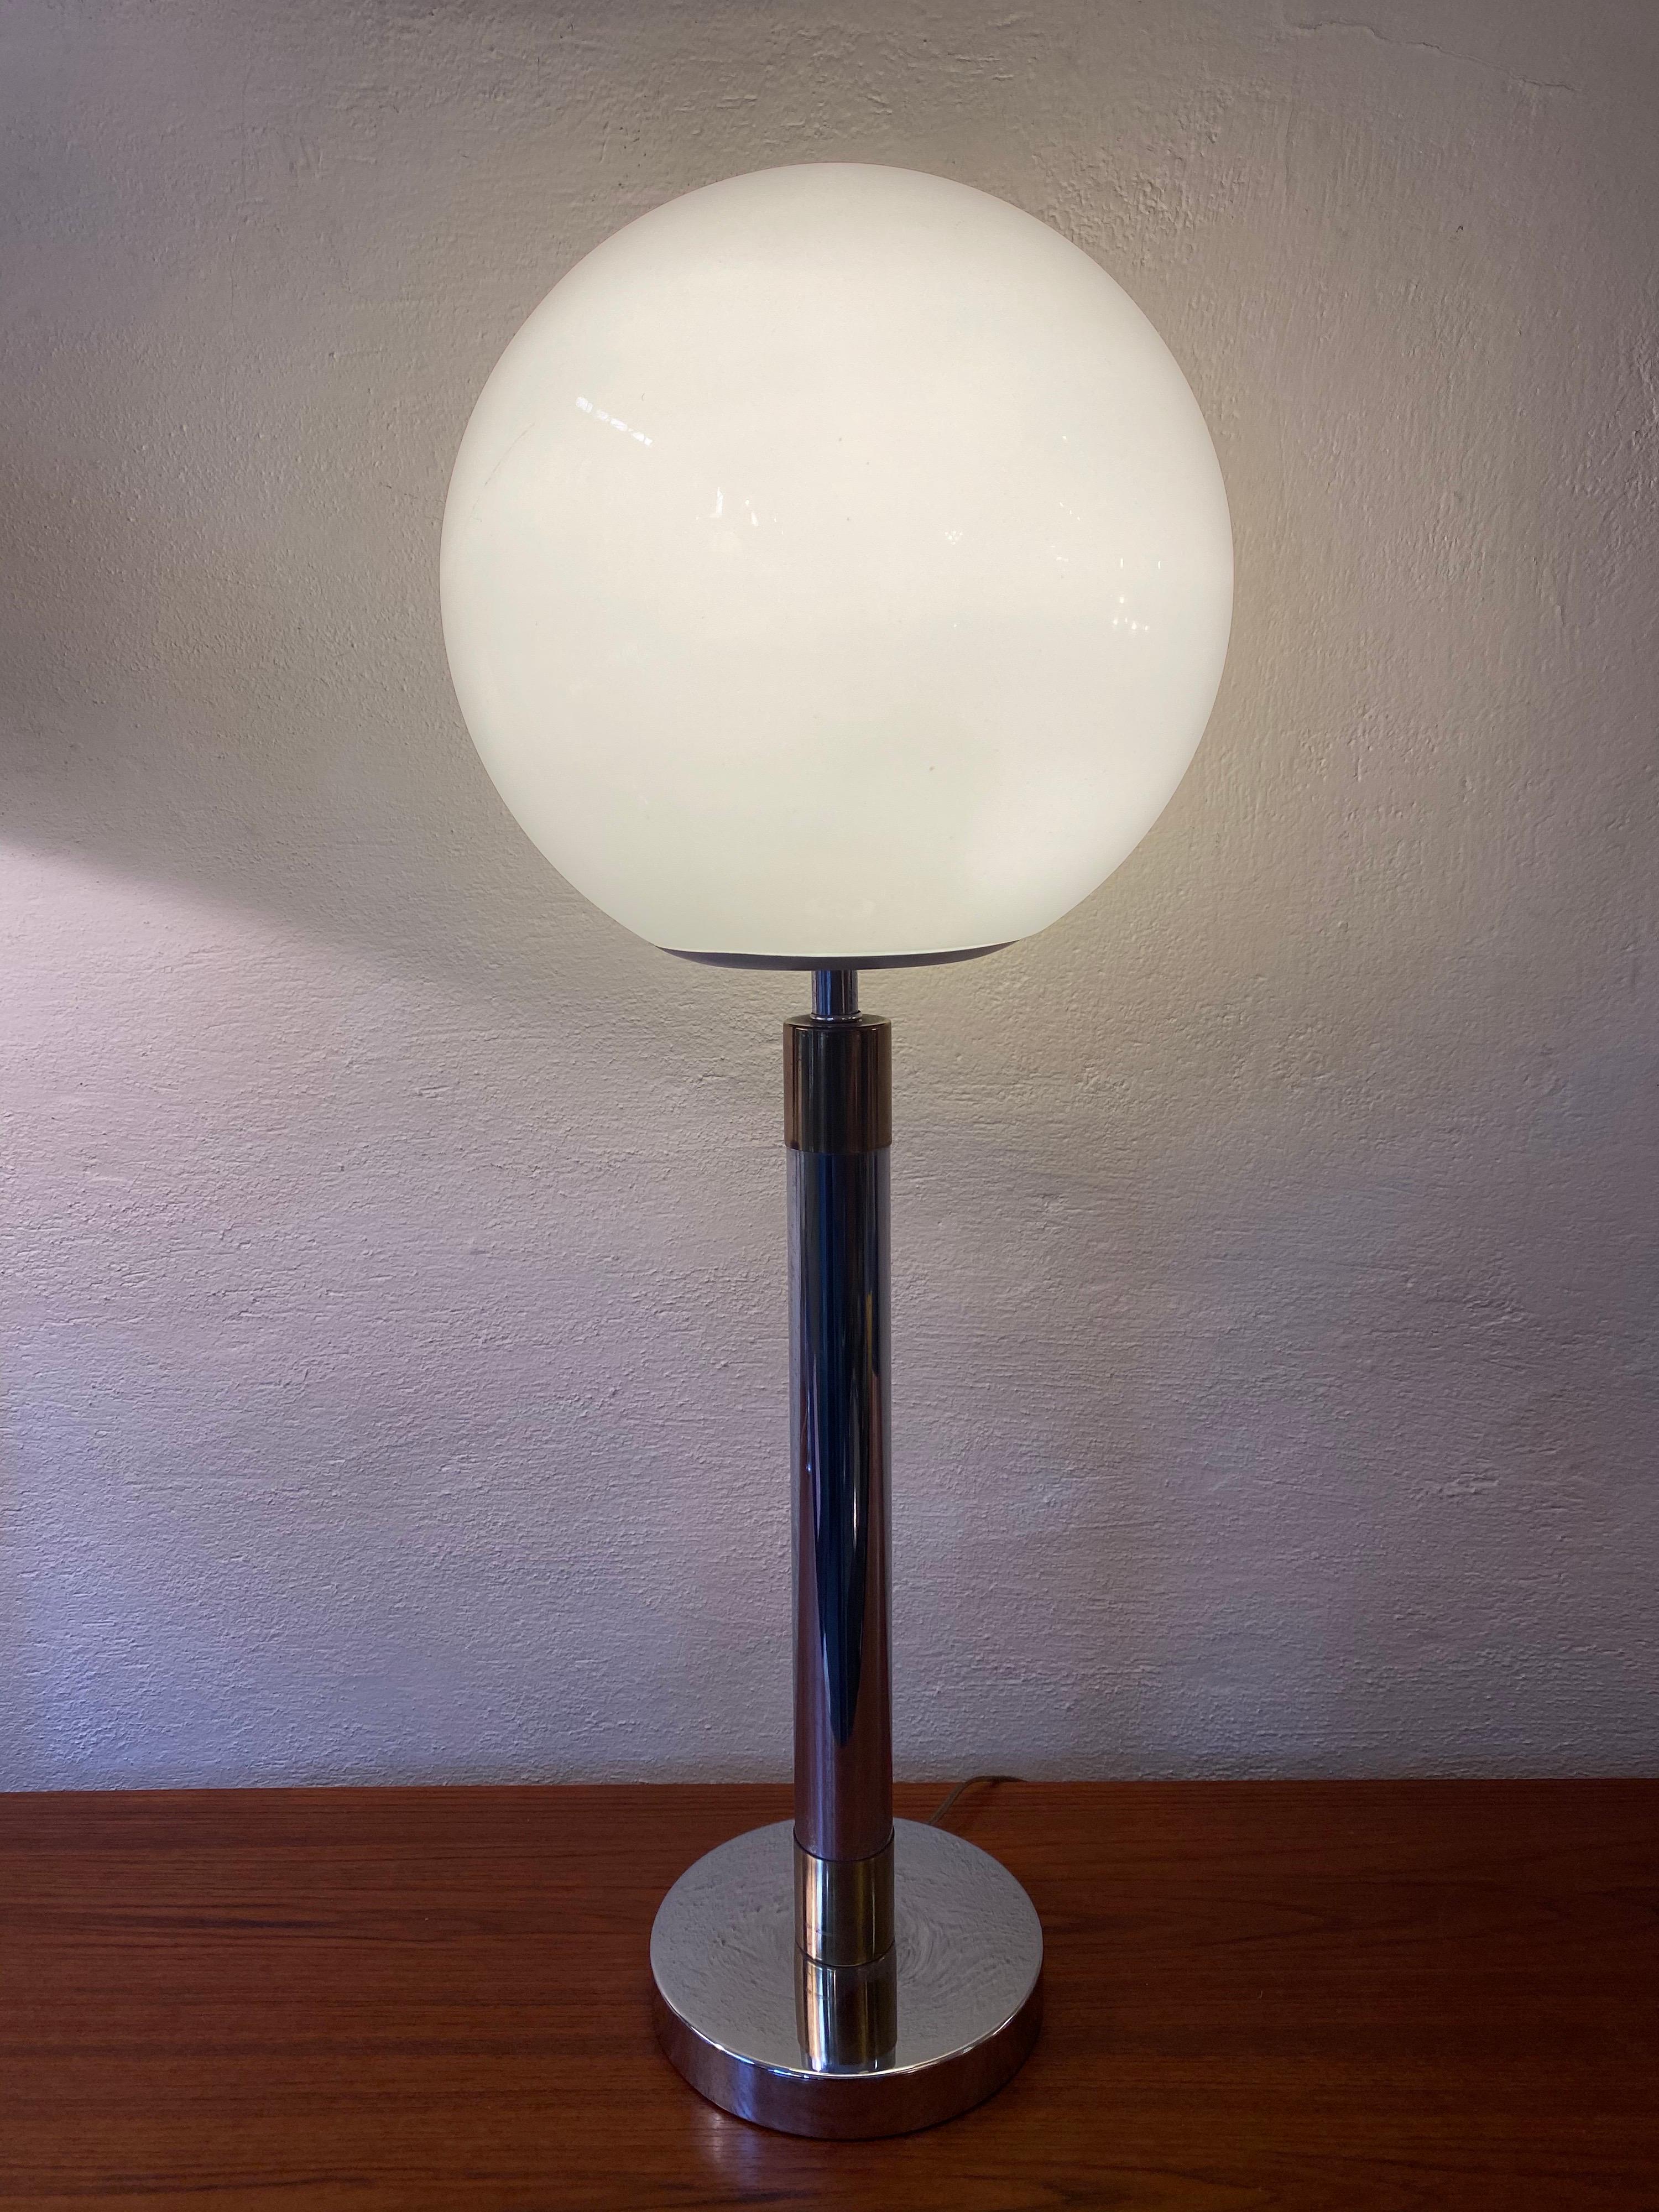 Chrome and brass table lamp, nice scale and size! Glass frosted shade sits securely on the metal platform, held in place with a set screw. On/off switch bottom of globe.